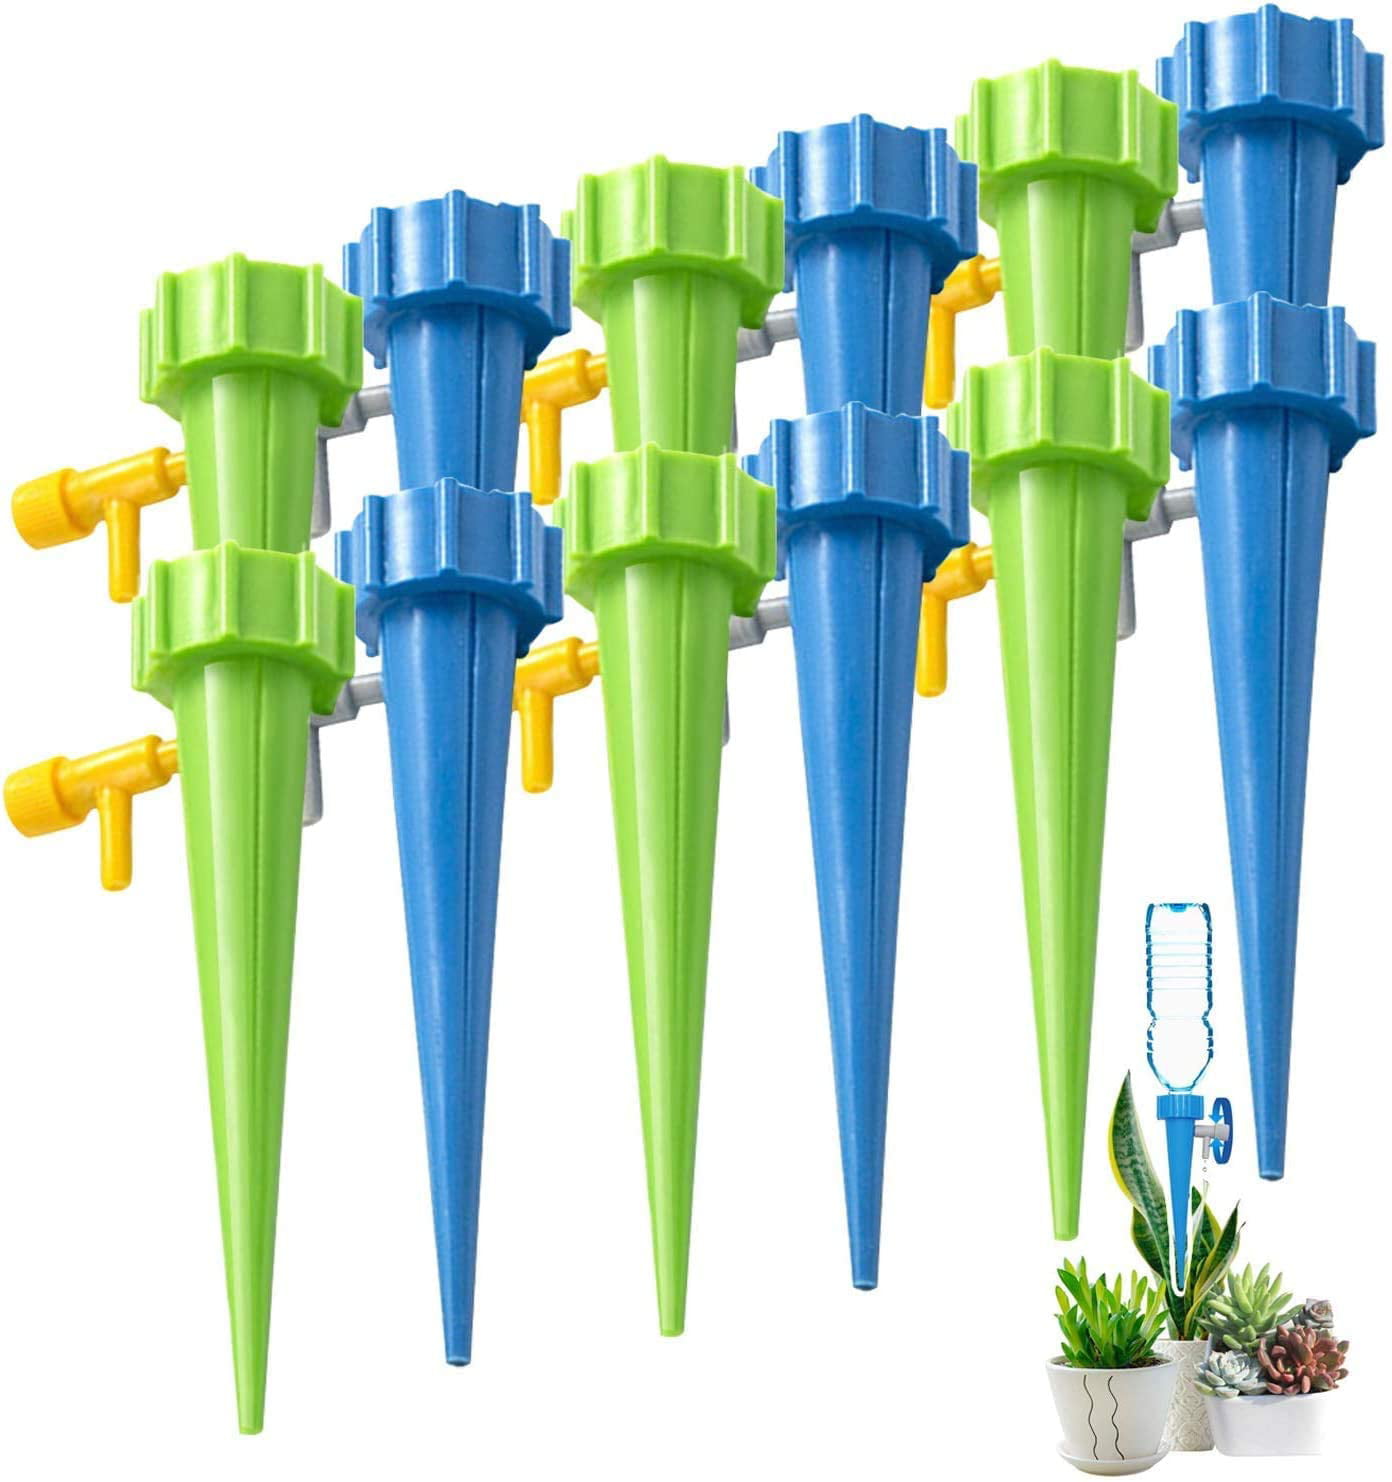 12 Pck Self Watering Spikes Automatic Watering Devices Adjustable Plant Watering Spikes with Slow Release Control Valve Switch for Indoor Outdoor Plants Upgrade Design 